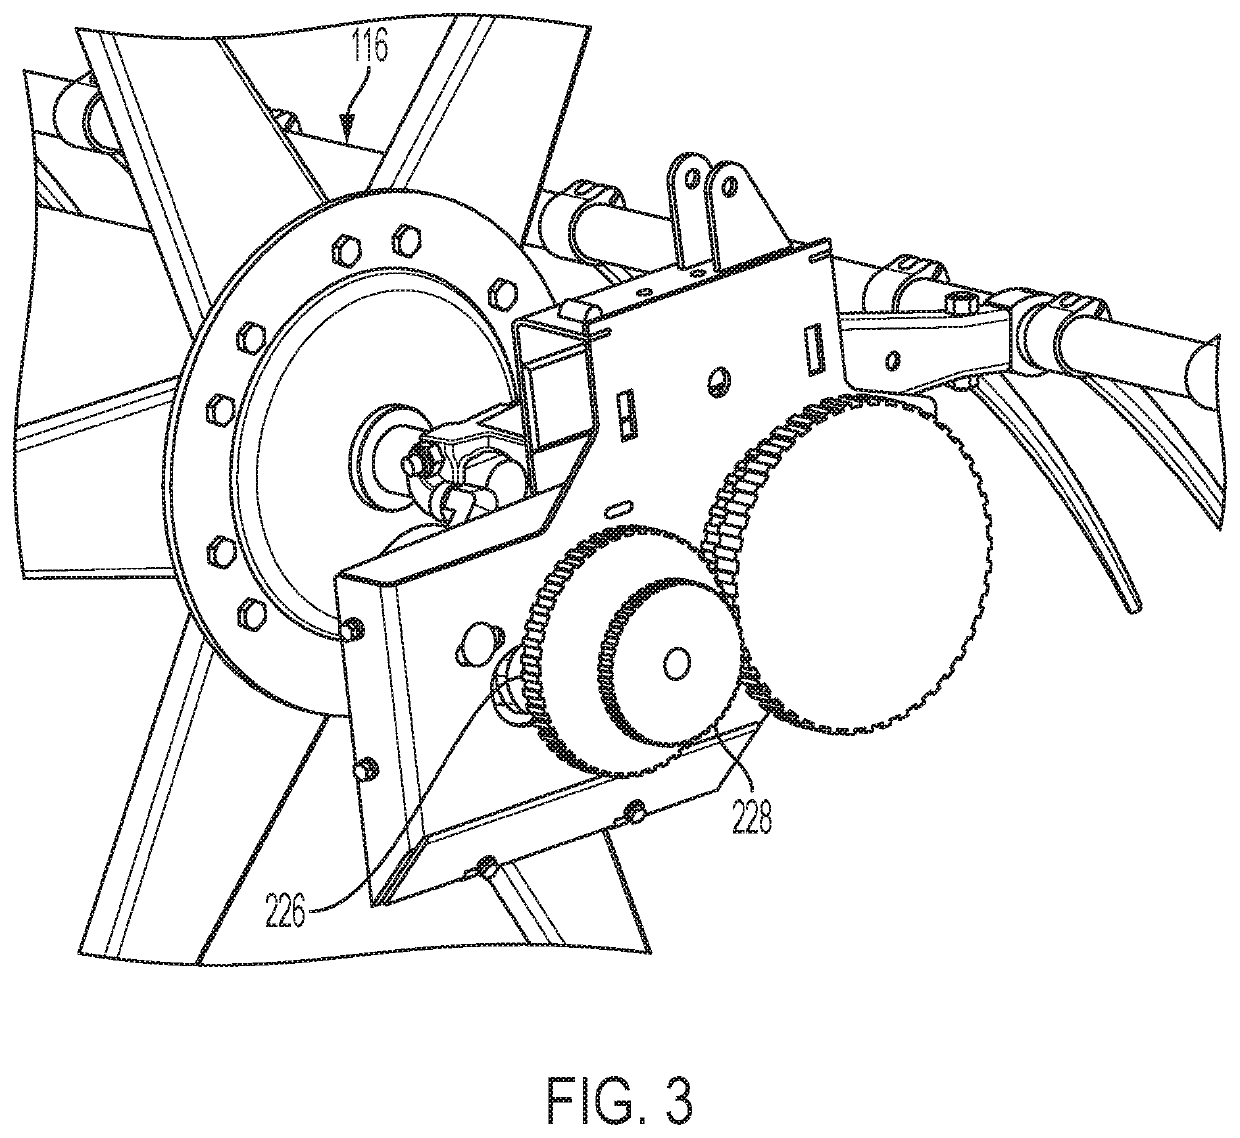 Variable speed reel drive for a header of an agricultural harvester